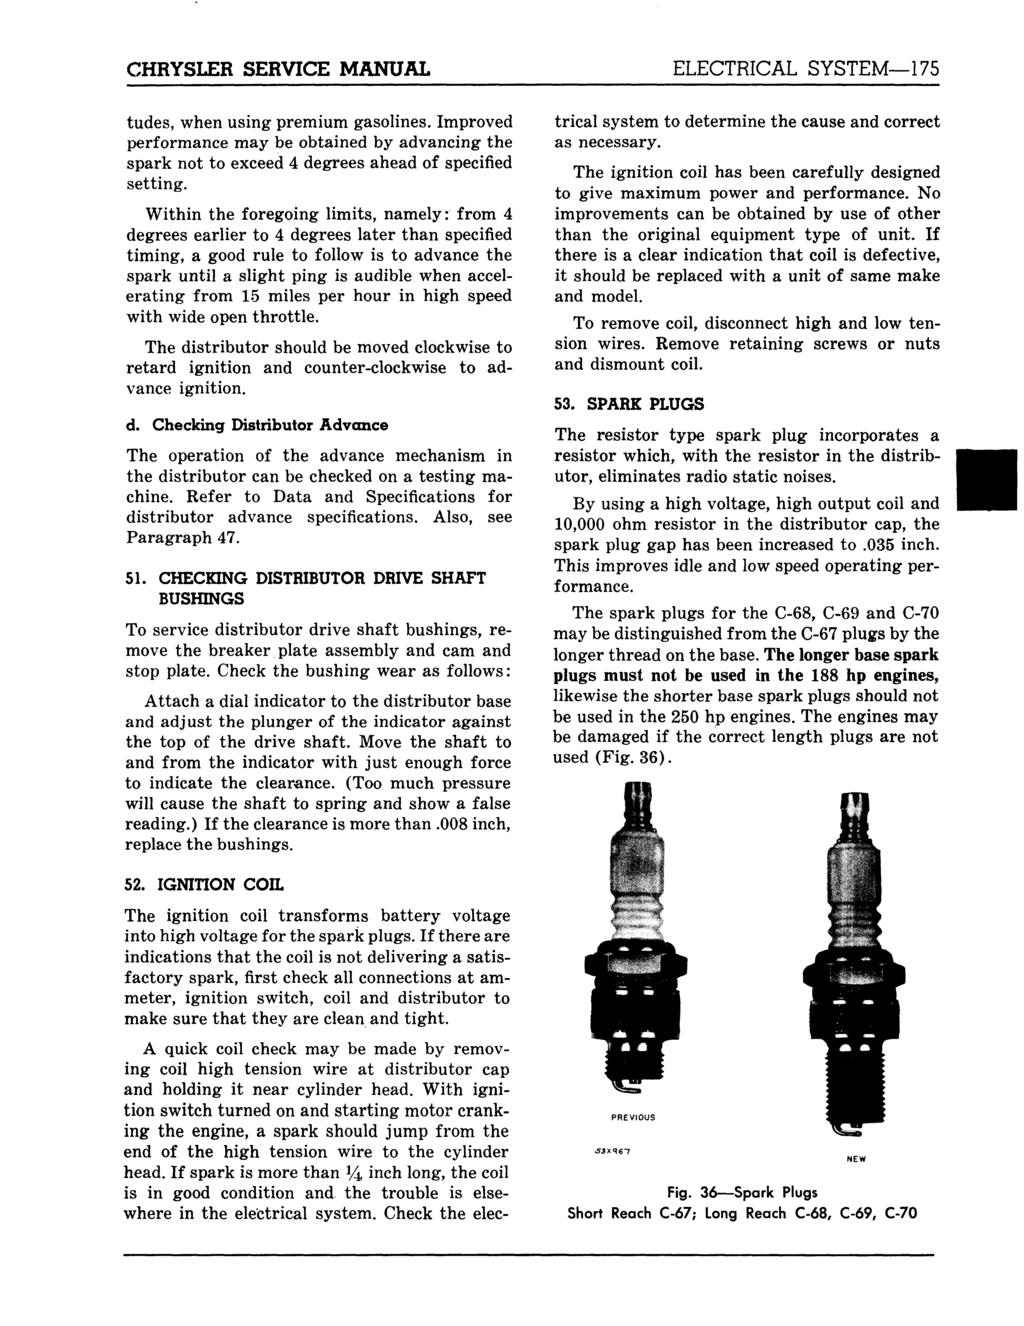 CHRYSLER SERVICE MANUAL ELECTRICAL SYSTEM 175 tudes, when using premium gasolines. Improved performance may be obtained by advancing the spark not to exceed 4 degrees ahead of specified setting.